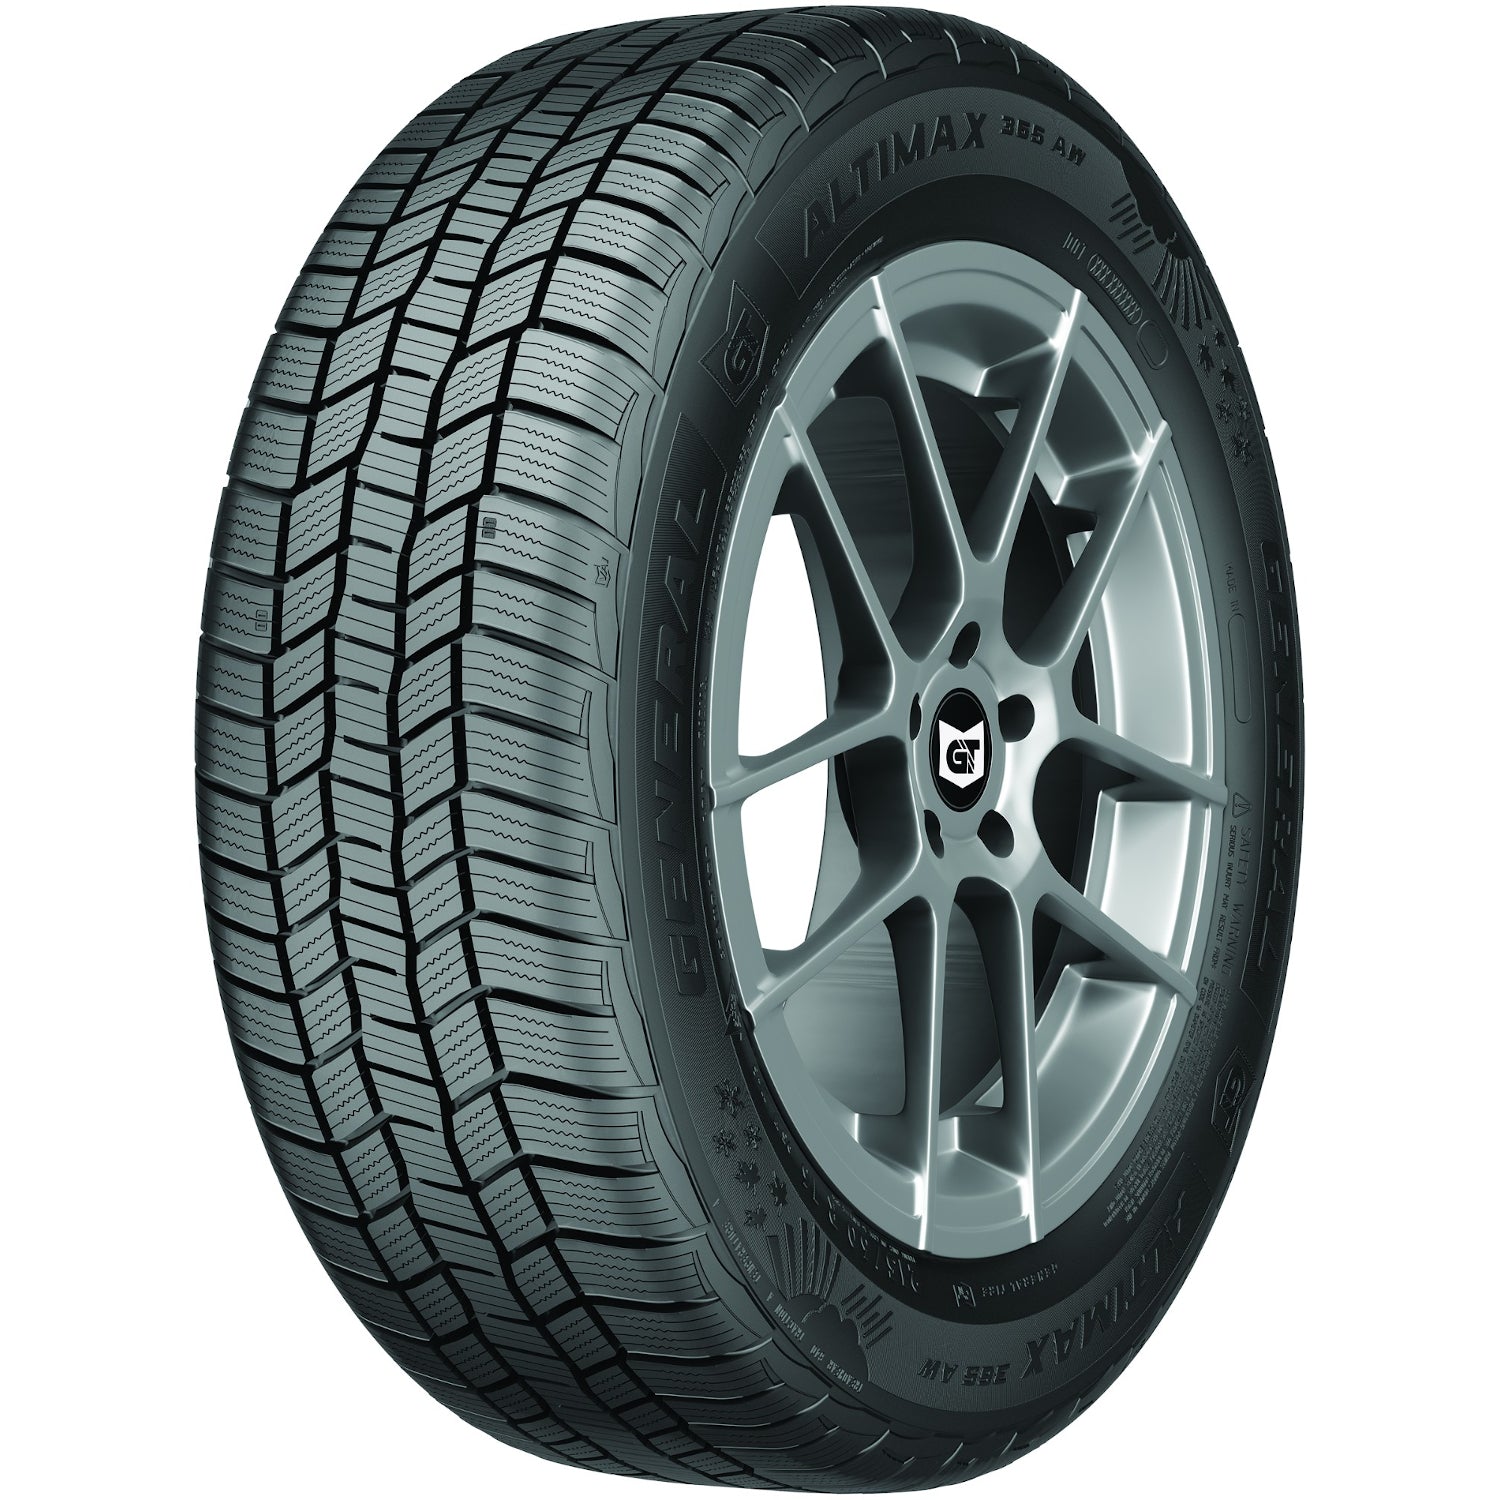 GENERAL ALTIMAX 365AW 235/60R17 (28.1X9.3R 17) Tires